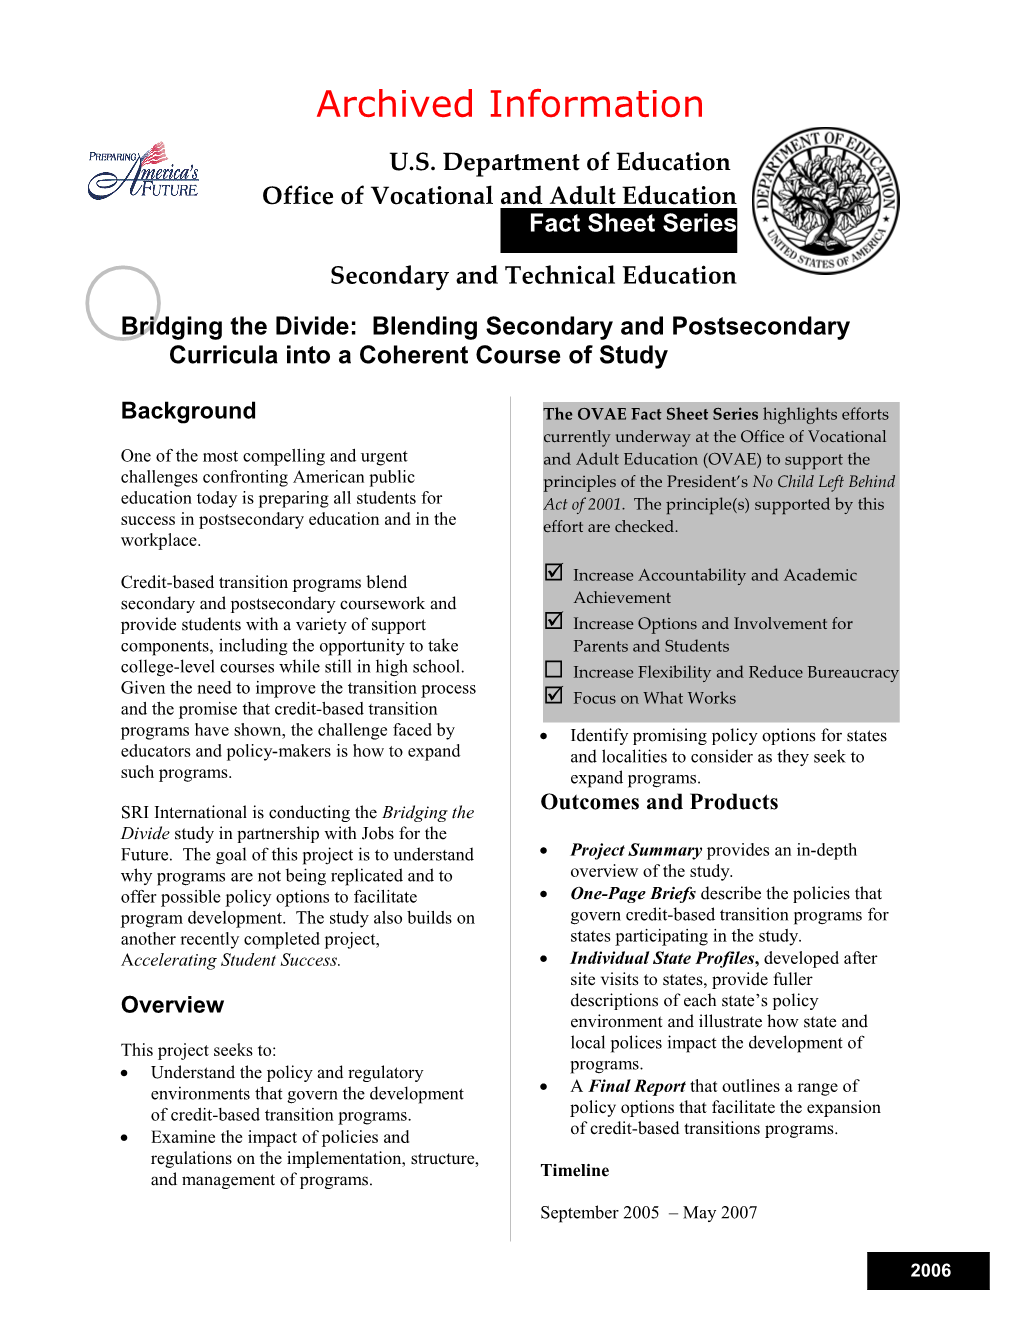 Archived: Bridging the Divide: Blending Secondary & Postsecondary Curricula Into a Coherent